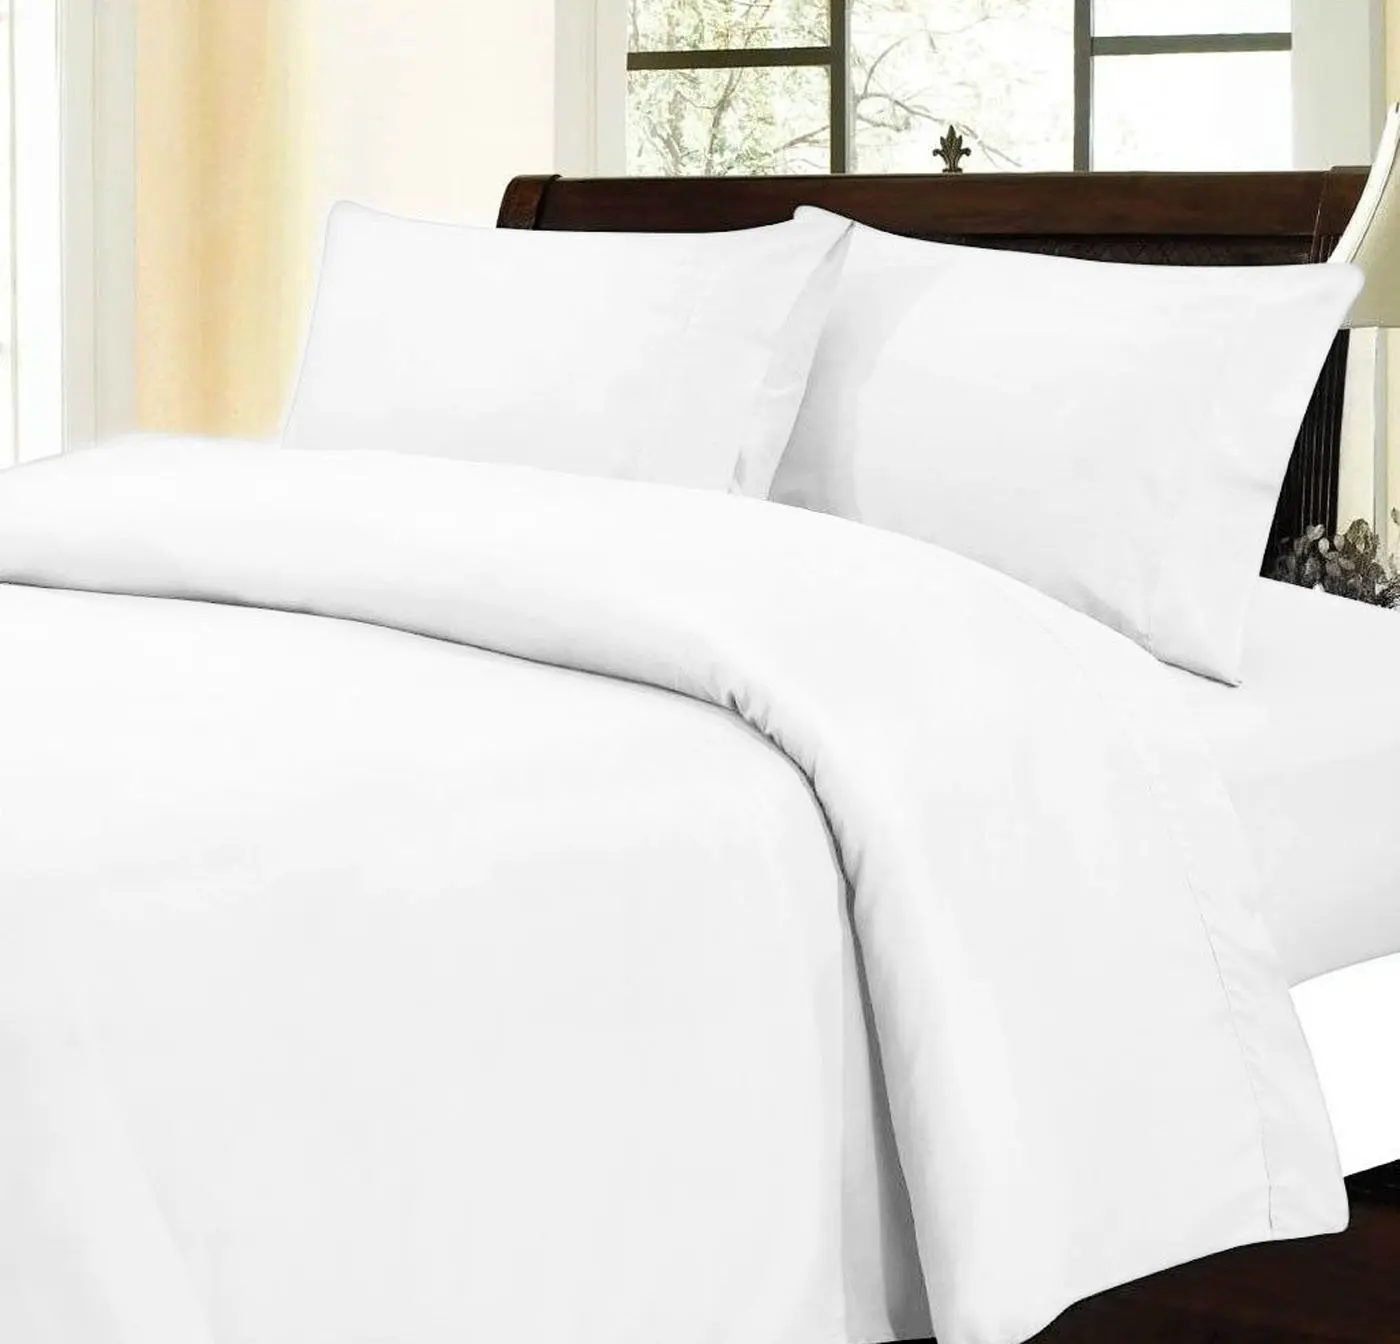 Cheap Duvet Cover And Sham Find Duvet Cover And Sham Deals On